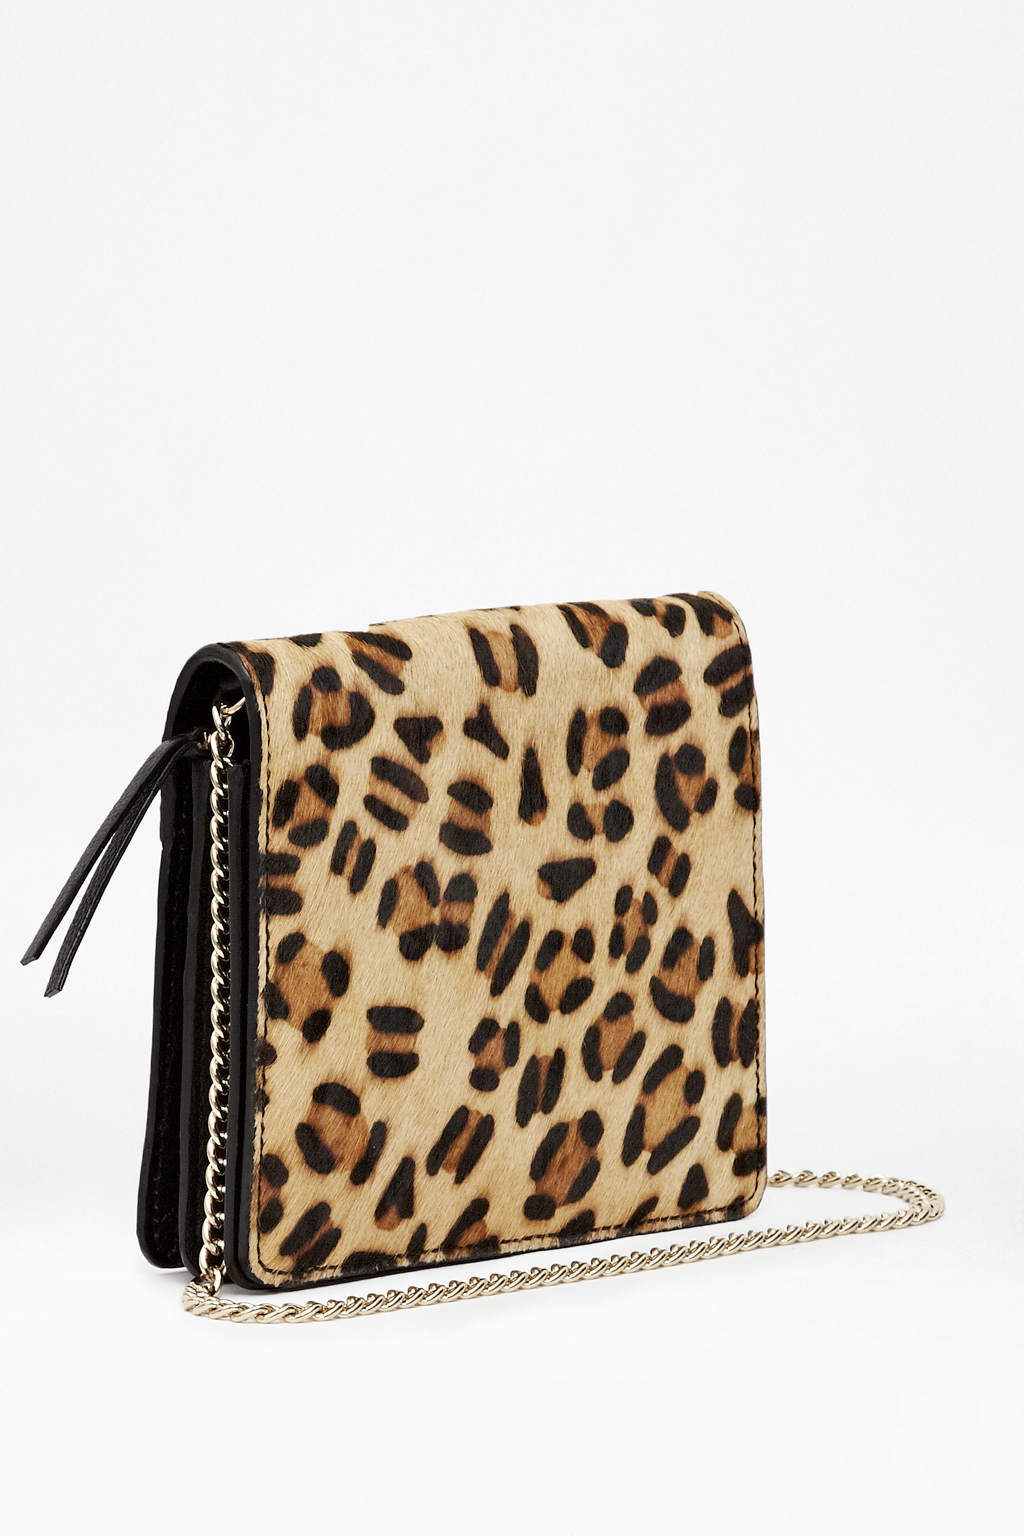 French Connection Chlo Leopard Print Crossbody Bag in Animal (Leopard ...